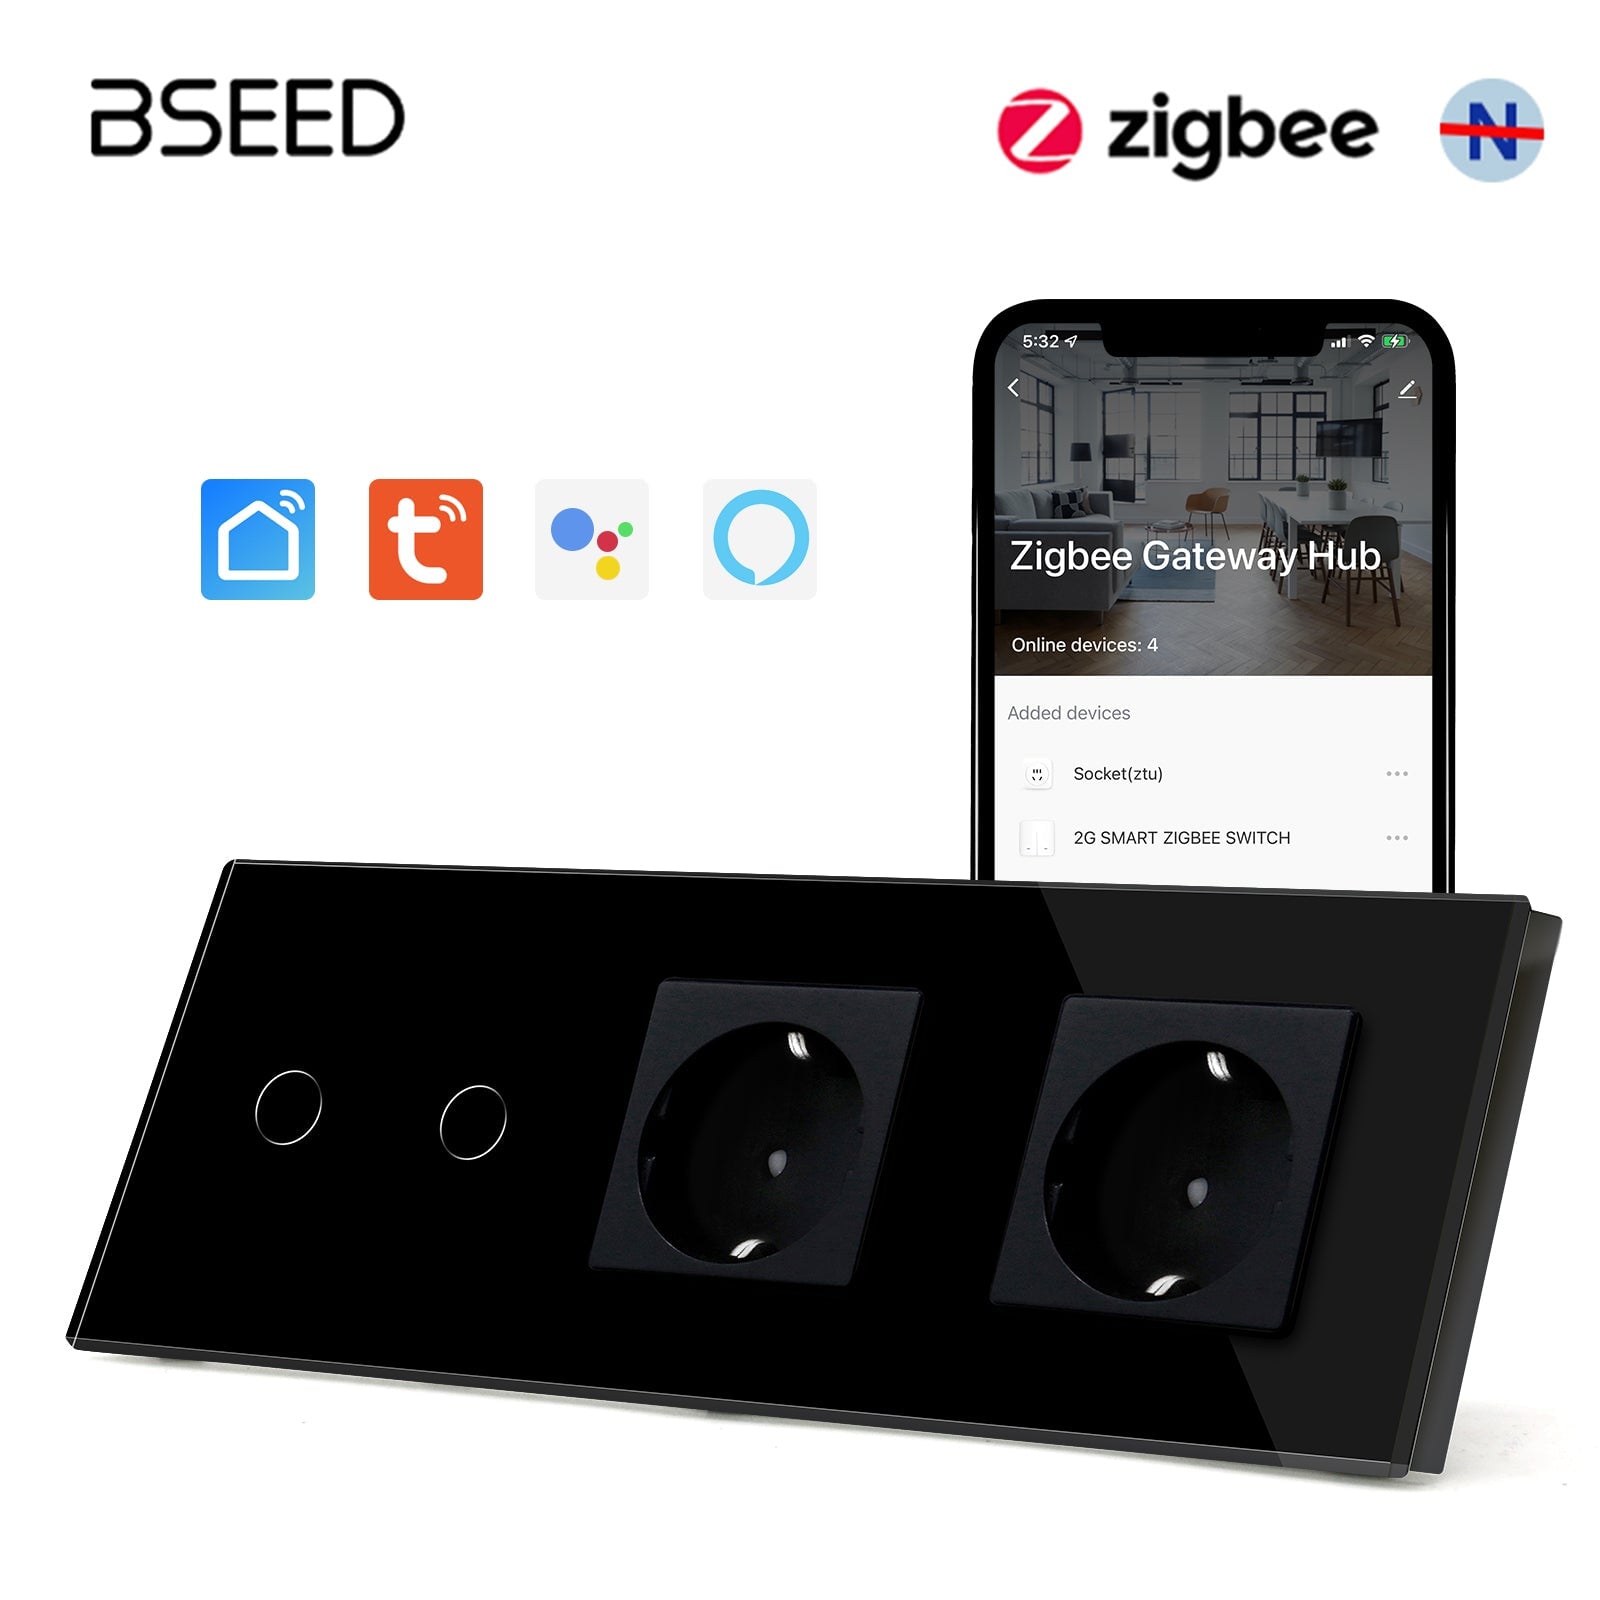 Bseed Zigbee Touch 1/2/3 Gang Light Switches Single Live Line Multi Control With Double EU Standard Not Smart Wall Sockets Light Switches Bseedswitch Black 2Gang 